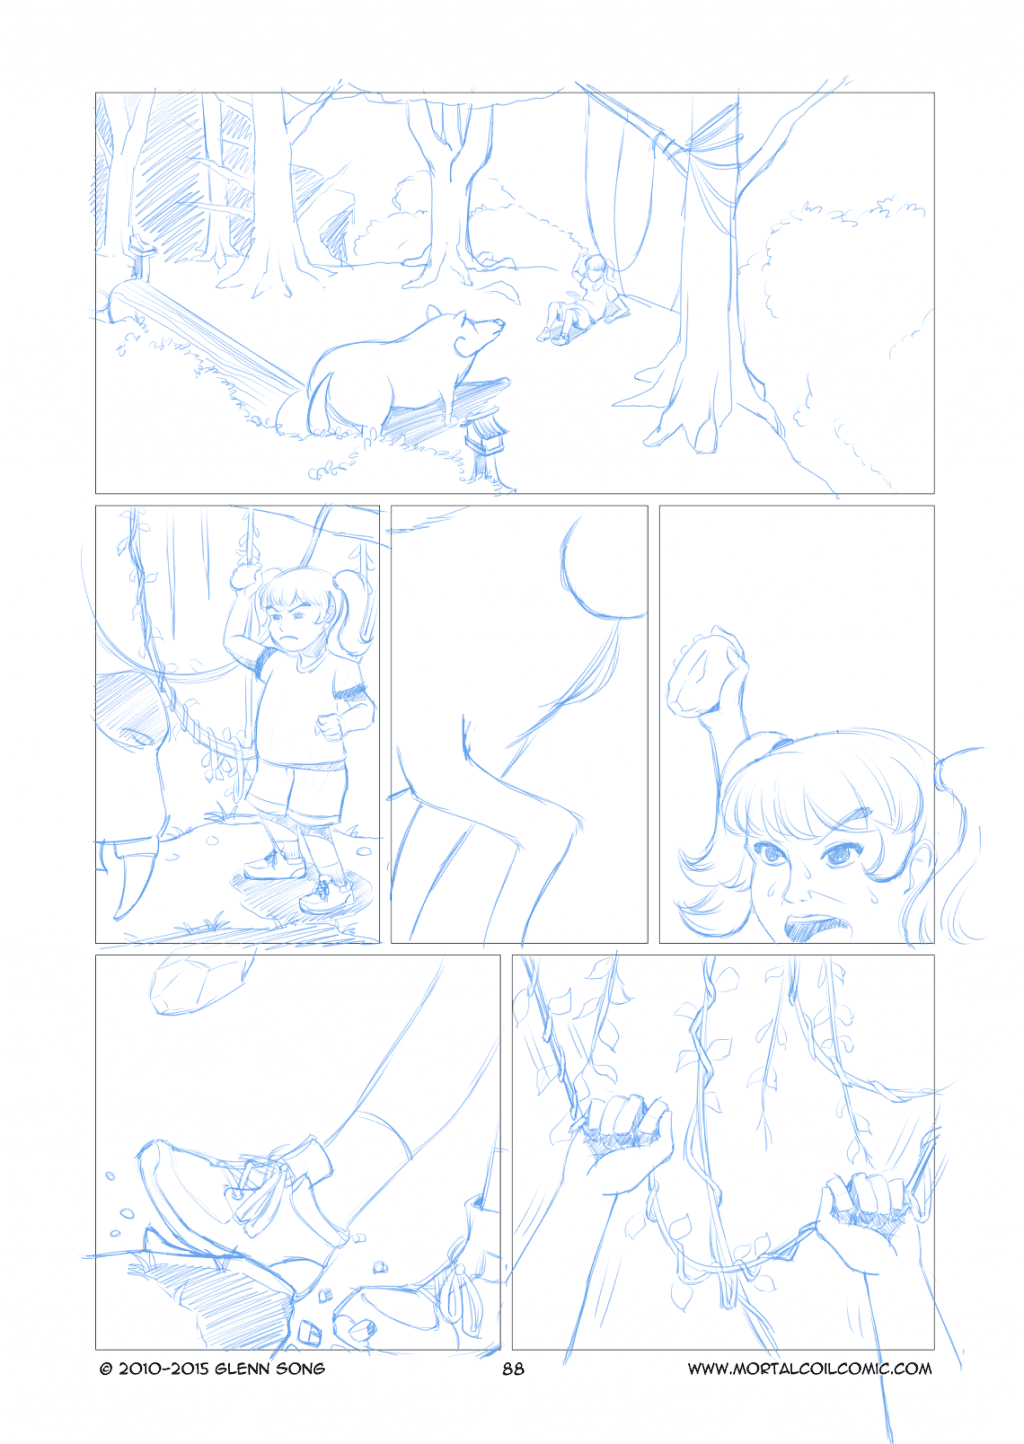 A Voice in the Woods - 5 - Pencils